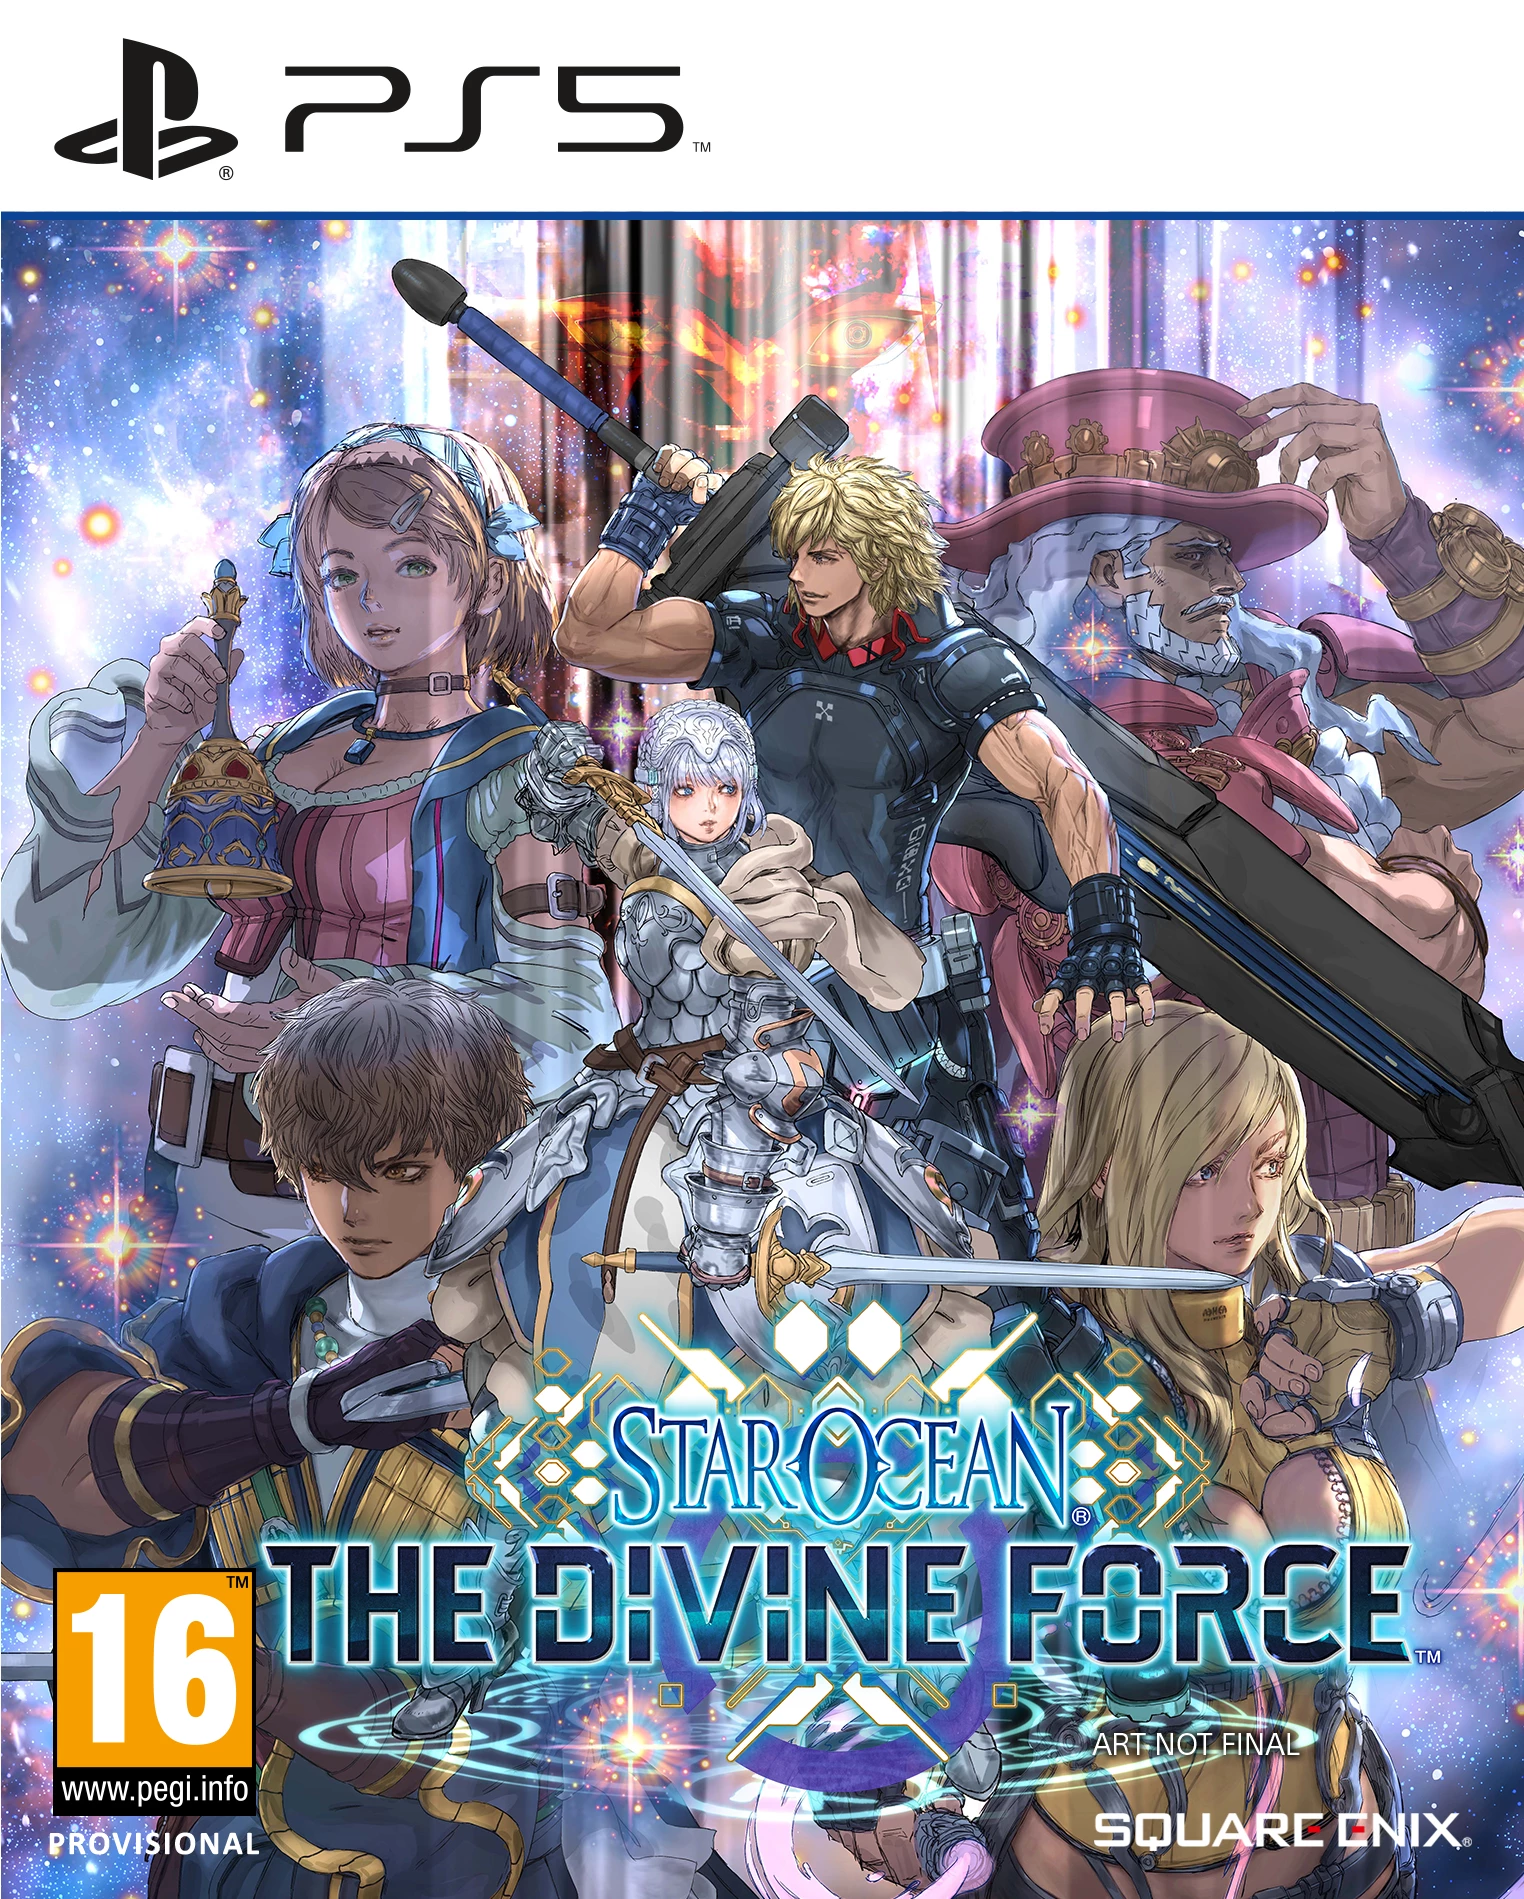 Star Ocean: The Divine Force (PS5), Square Enix